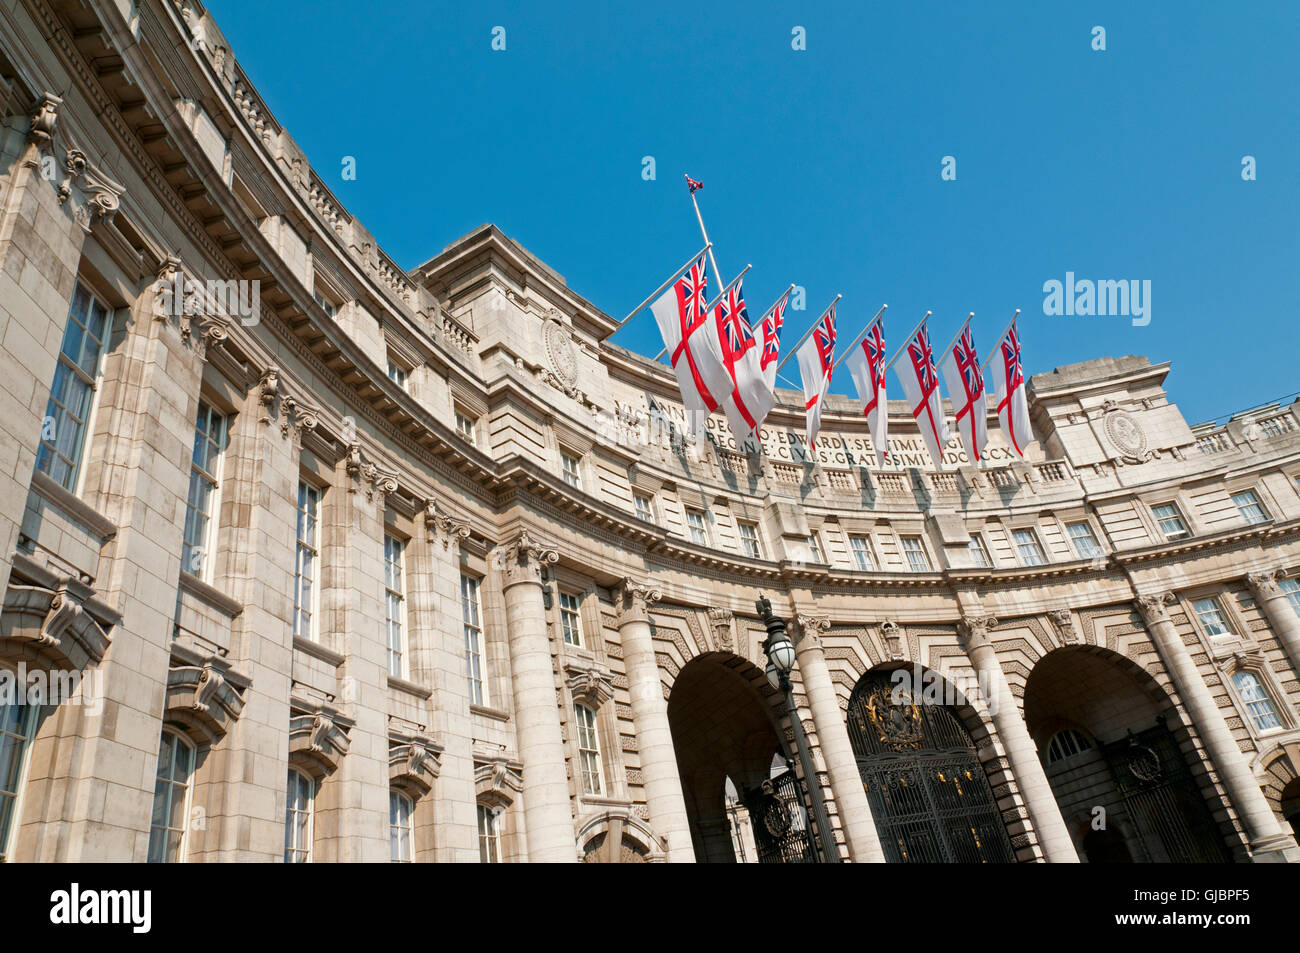 Admiralty Arch in London with eight white ensigns, the flag of the British Royal Navy, flying. Stock Photo